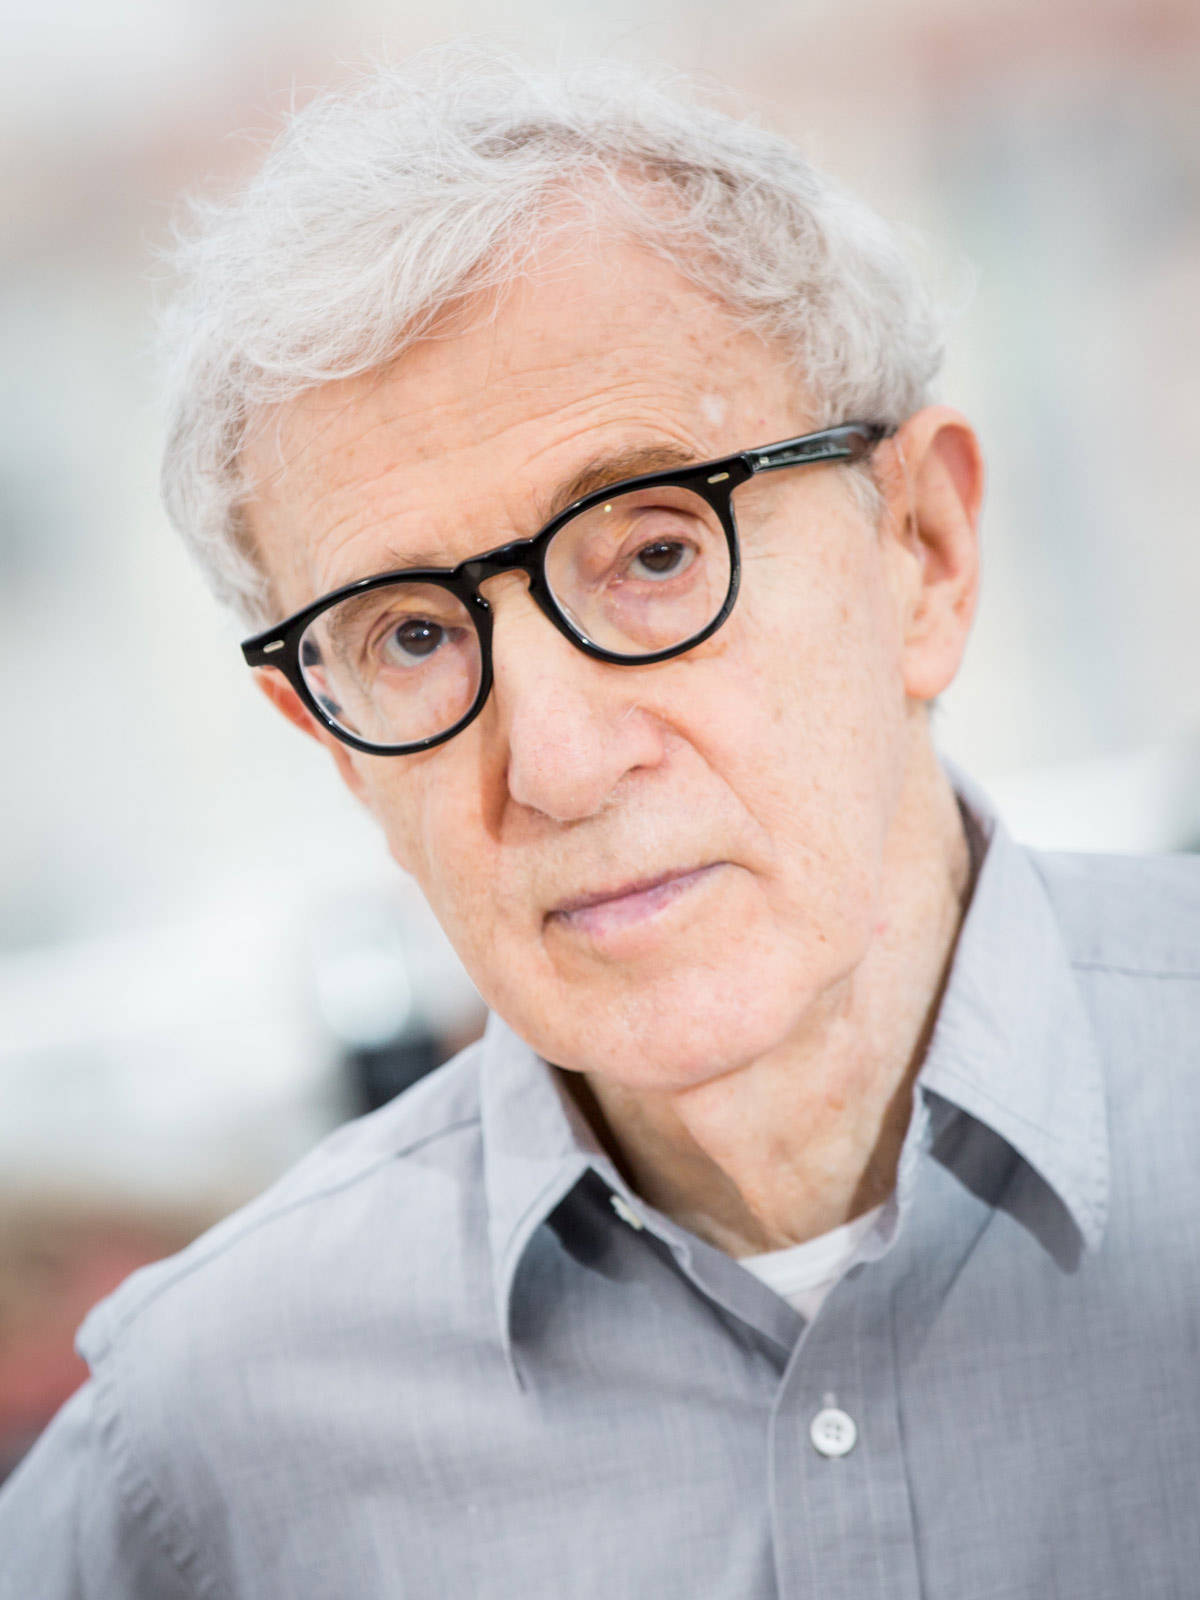 American Filmmaker Woody Allen During The 69th Cannes Film Festival Wallpaper